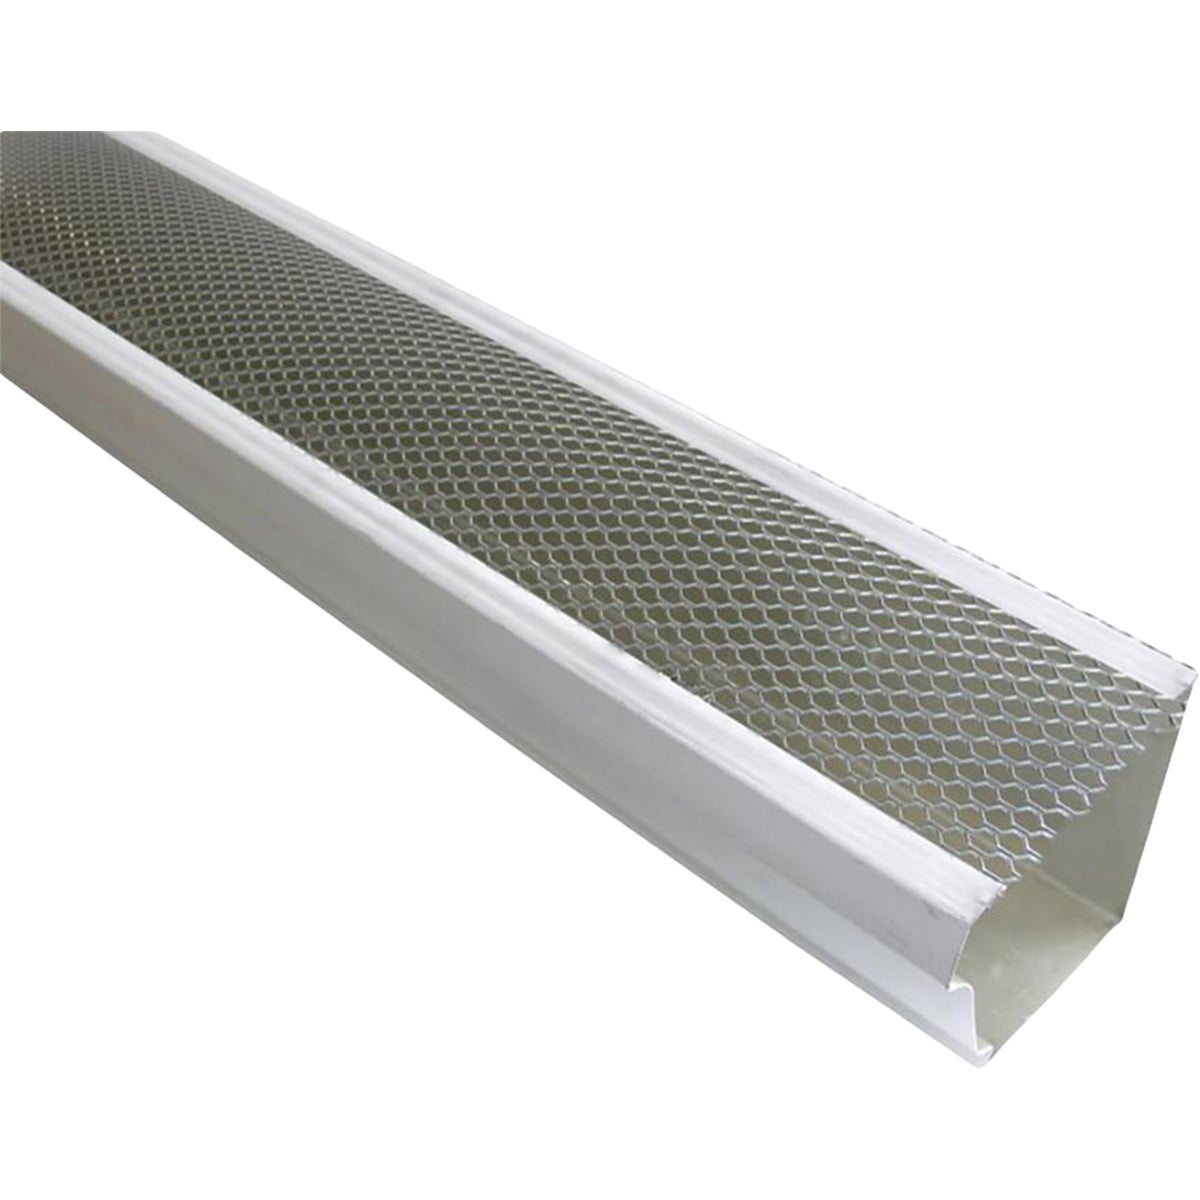 Spectra Pro Select Armour 5-1/4 In. x 3 Ft. Aluminum Screen Gutter Guard